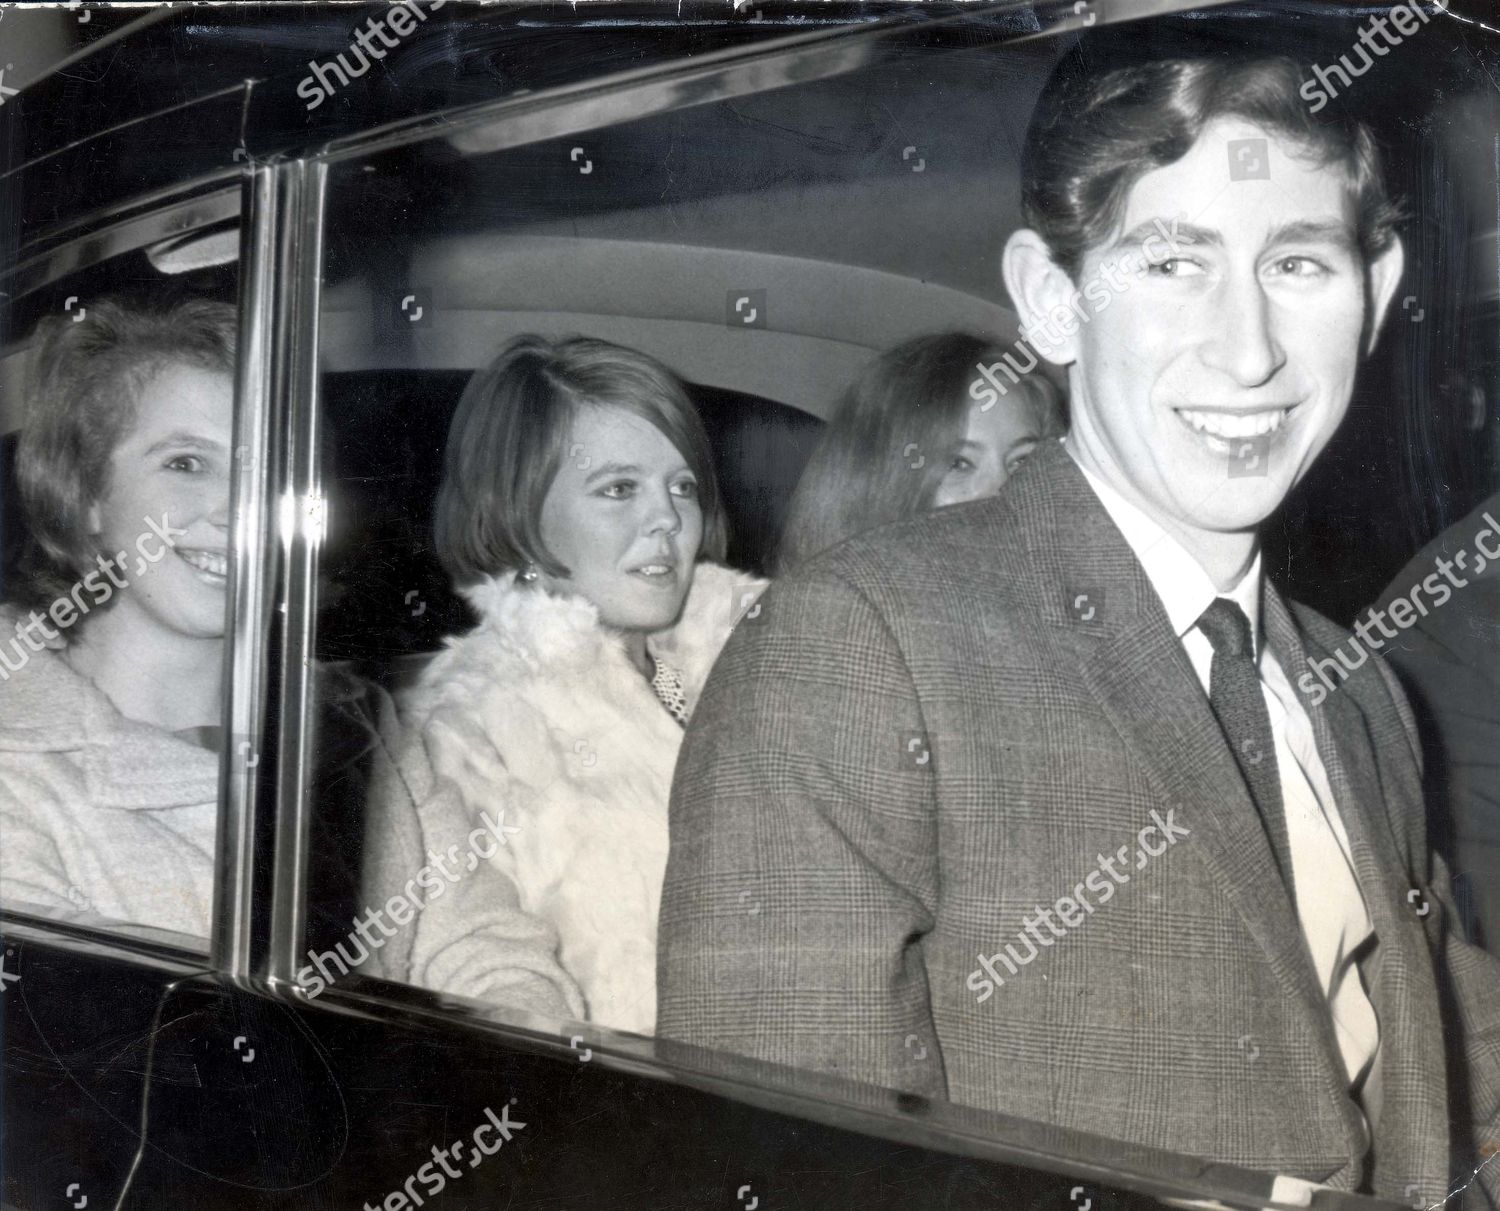 prince-charles-the-prince-of-wales-december-1966-princess-anne-prince-charles-and-friends-in-christopher-soames-party-leaving-from-haymarket-theatre-tonight-the-smiles-contradict-what-the-theatre-critics-had-to-say-about-the-current-production-of-shutterstock-editorial-1049676a.jpg